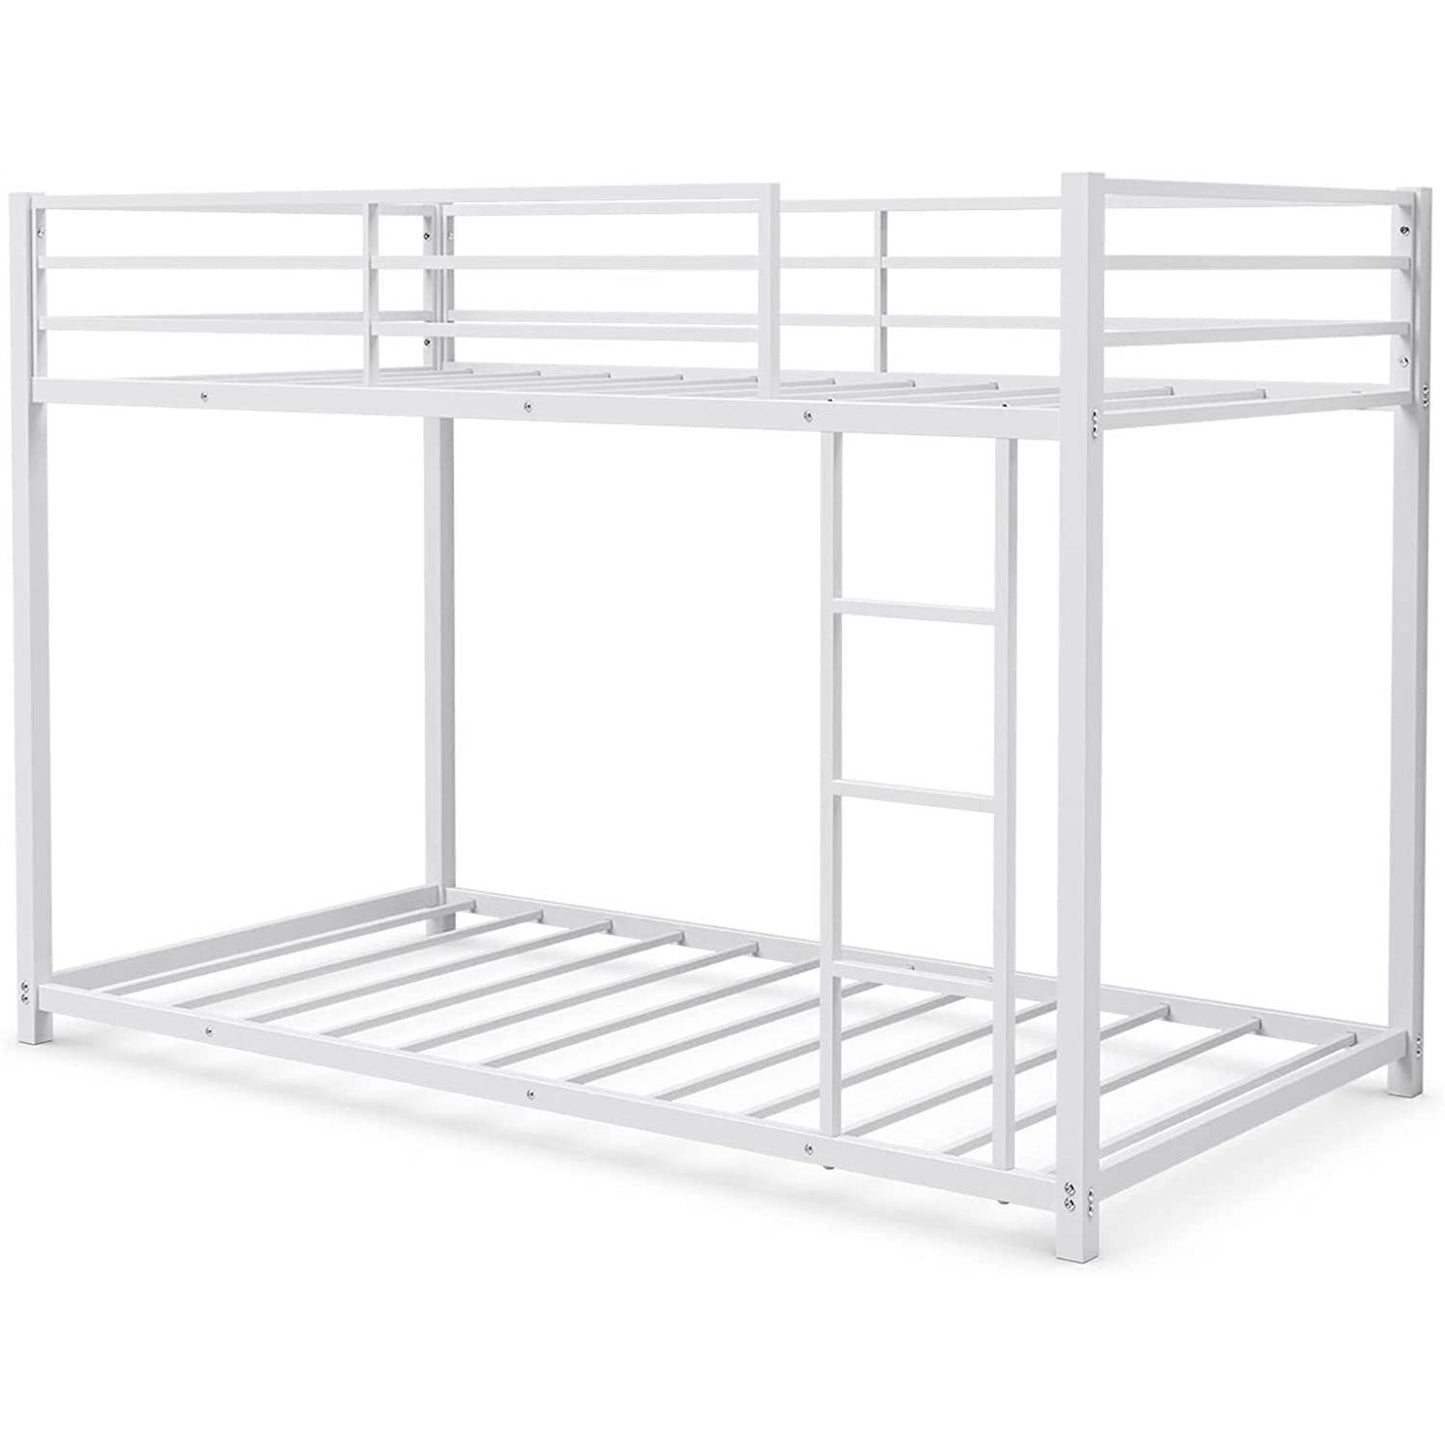 Twin over Twin Low Profile Modern Bunk Bed Frame in White Metal Finish